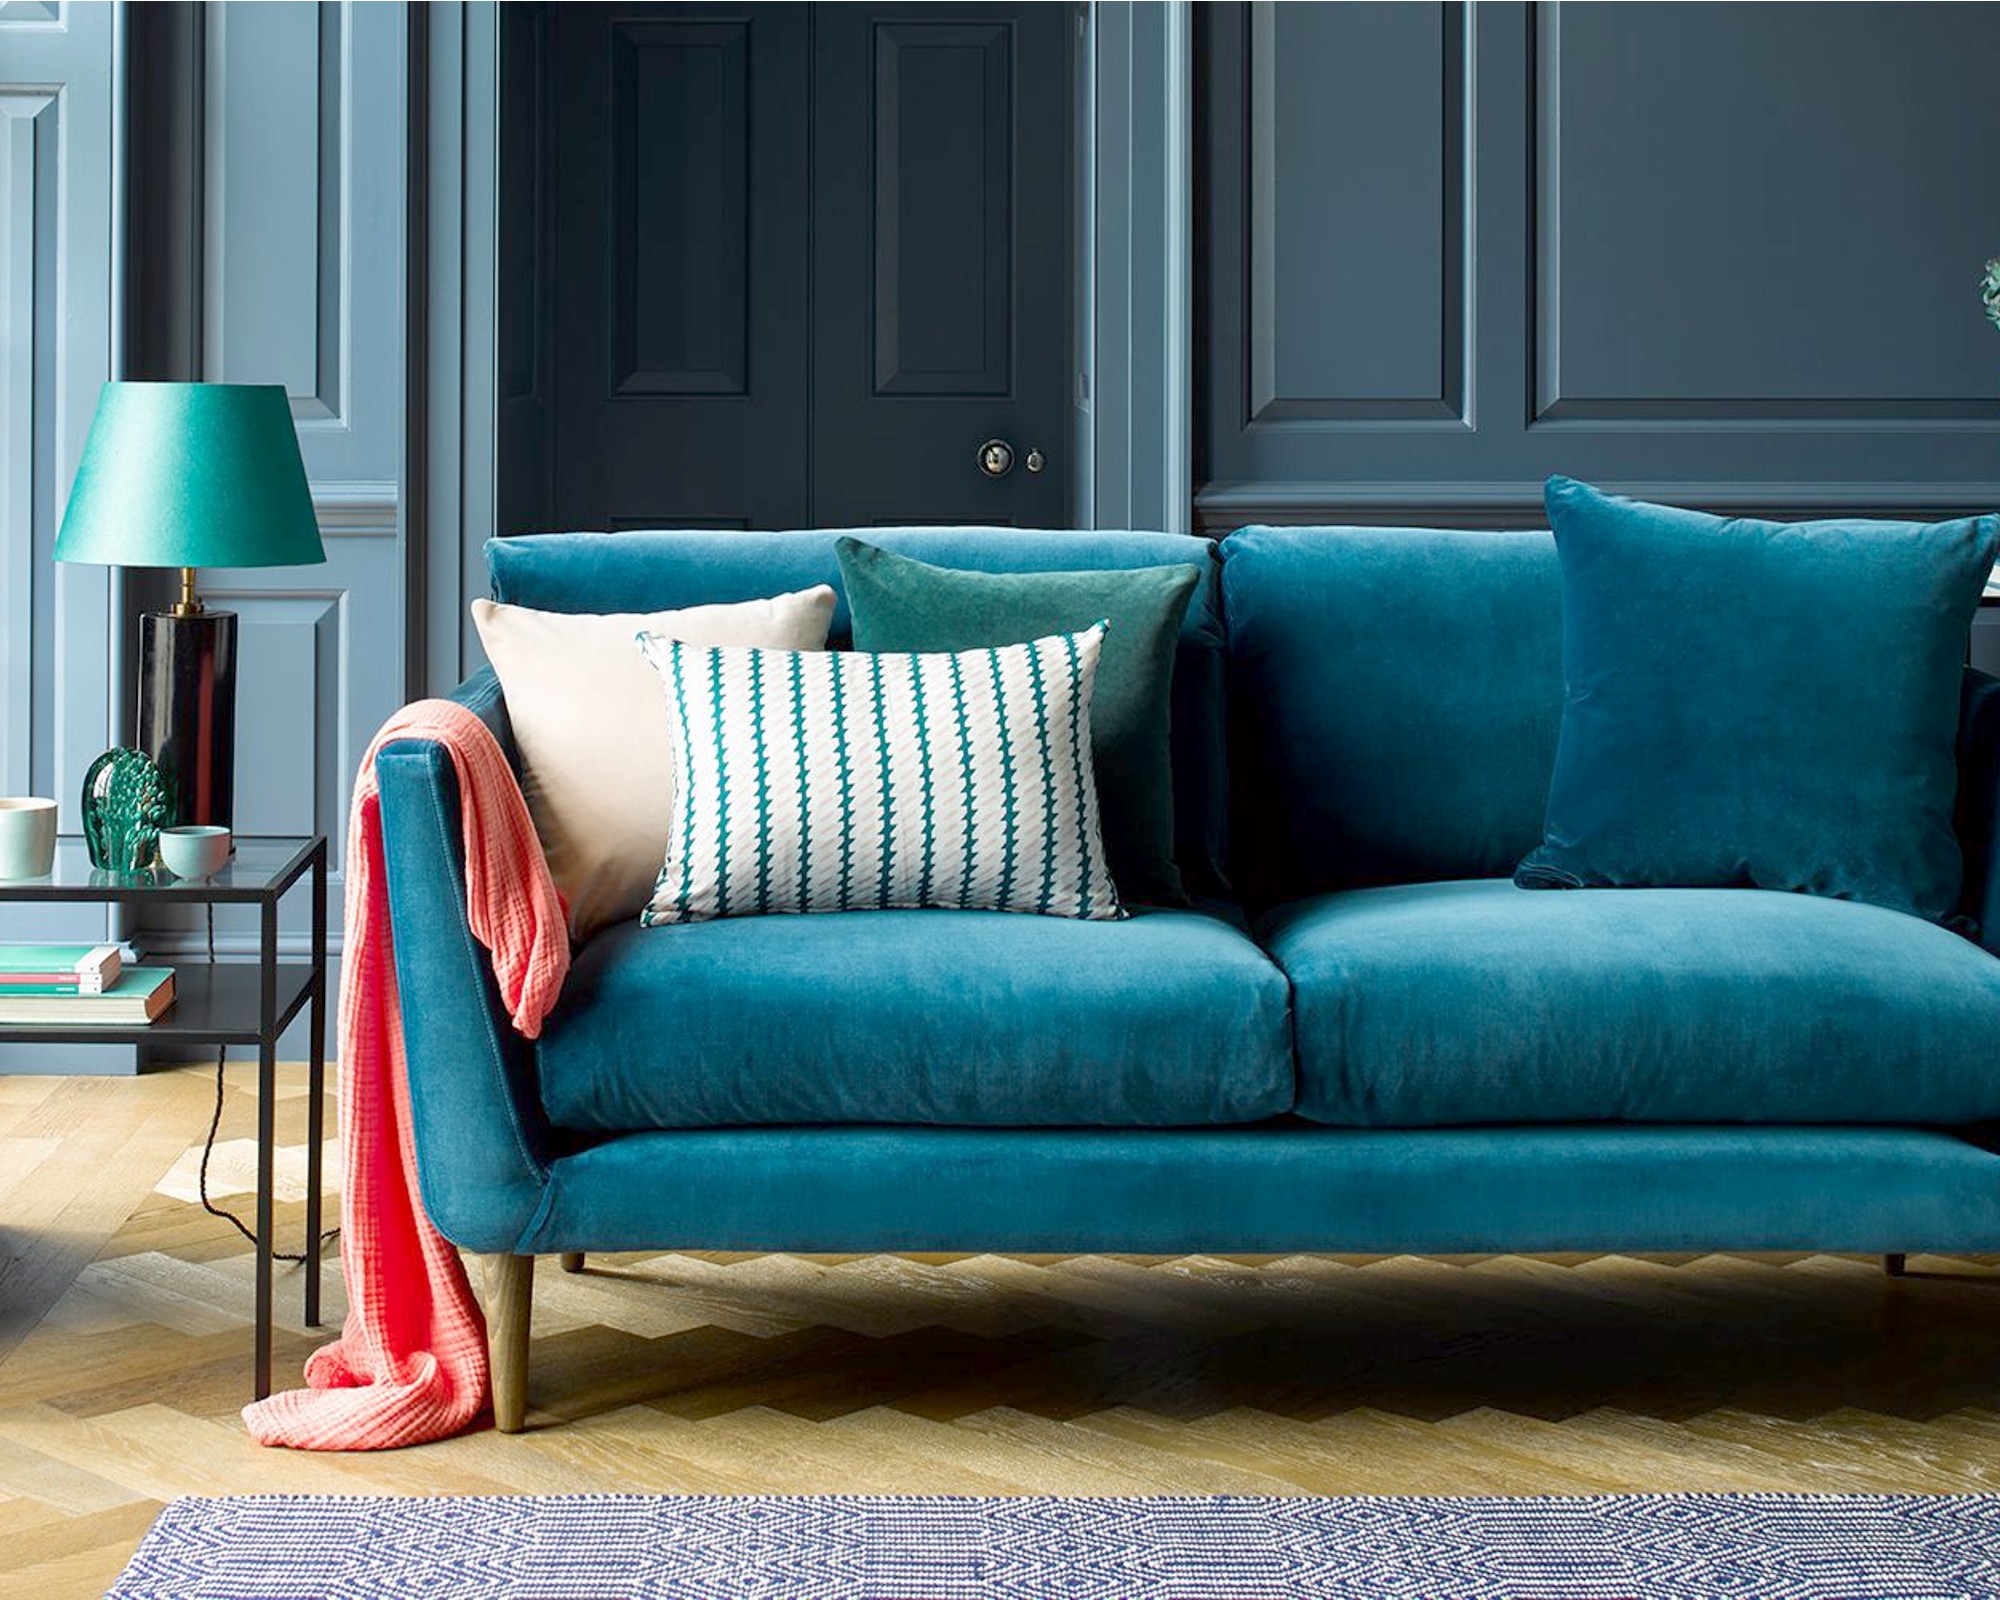 A teal blue velvet sofa with wooden legs in a living room with blue painted panelled walls